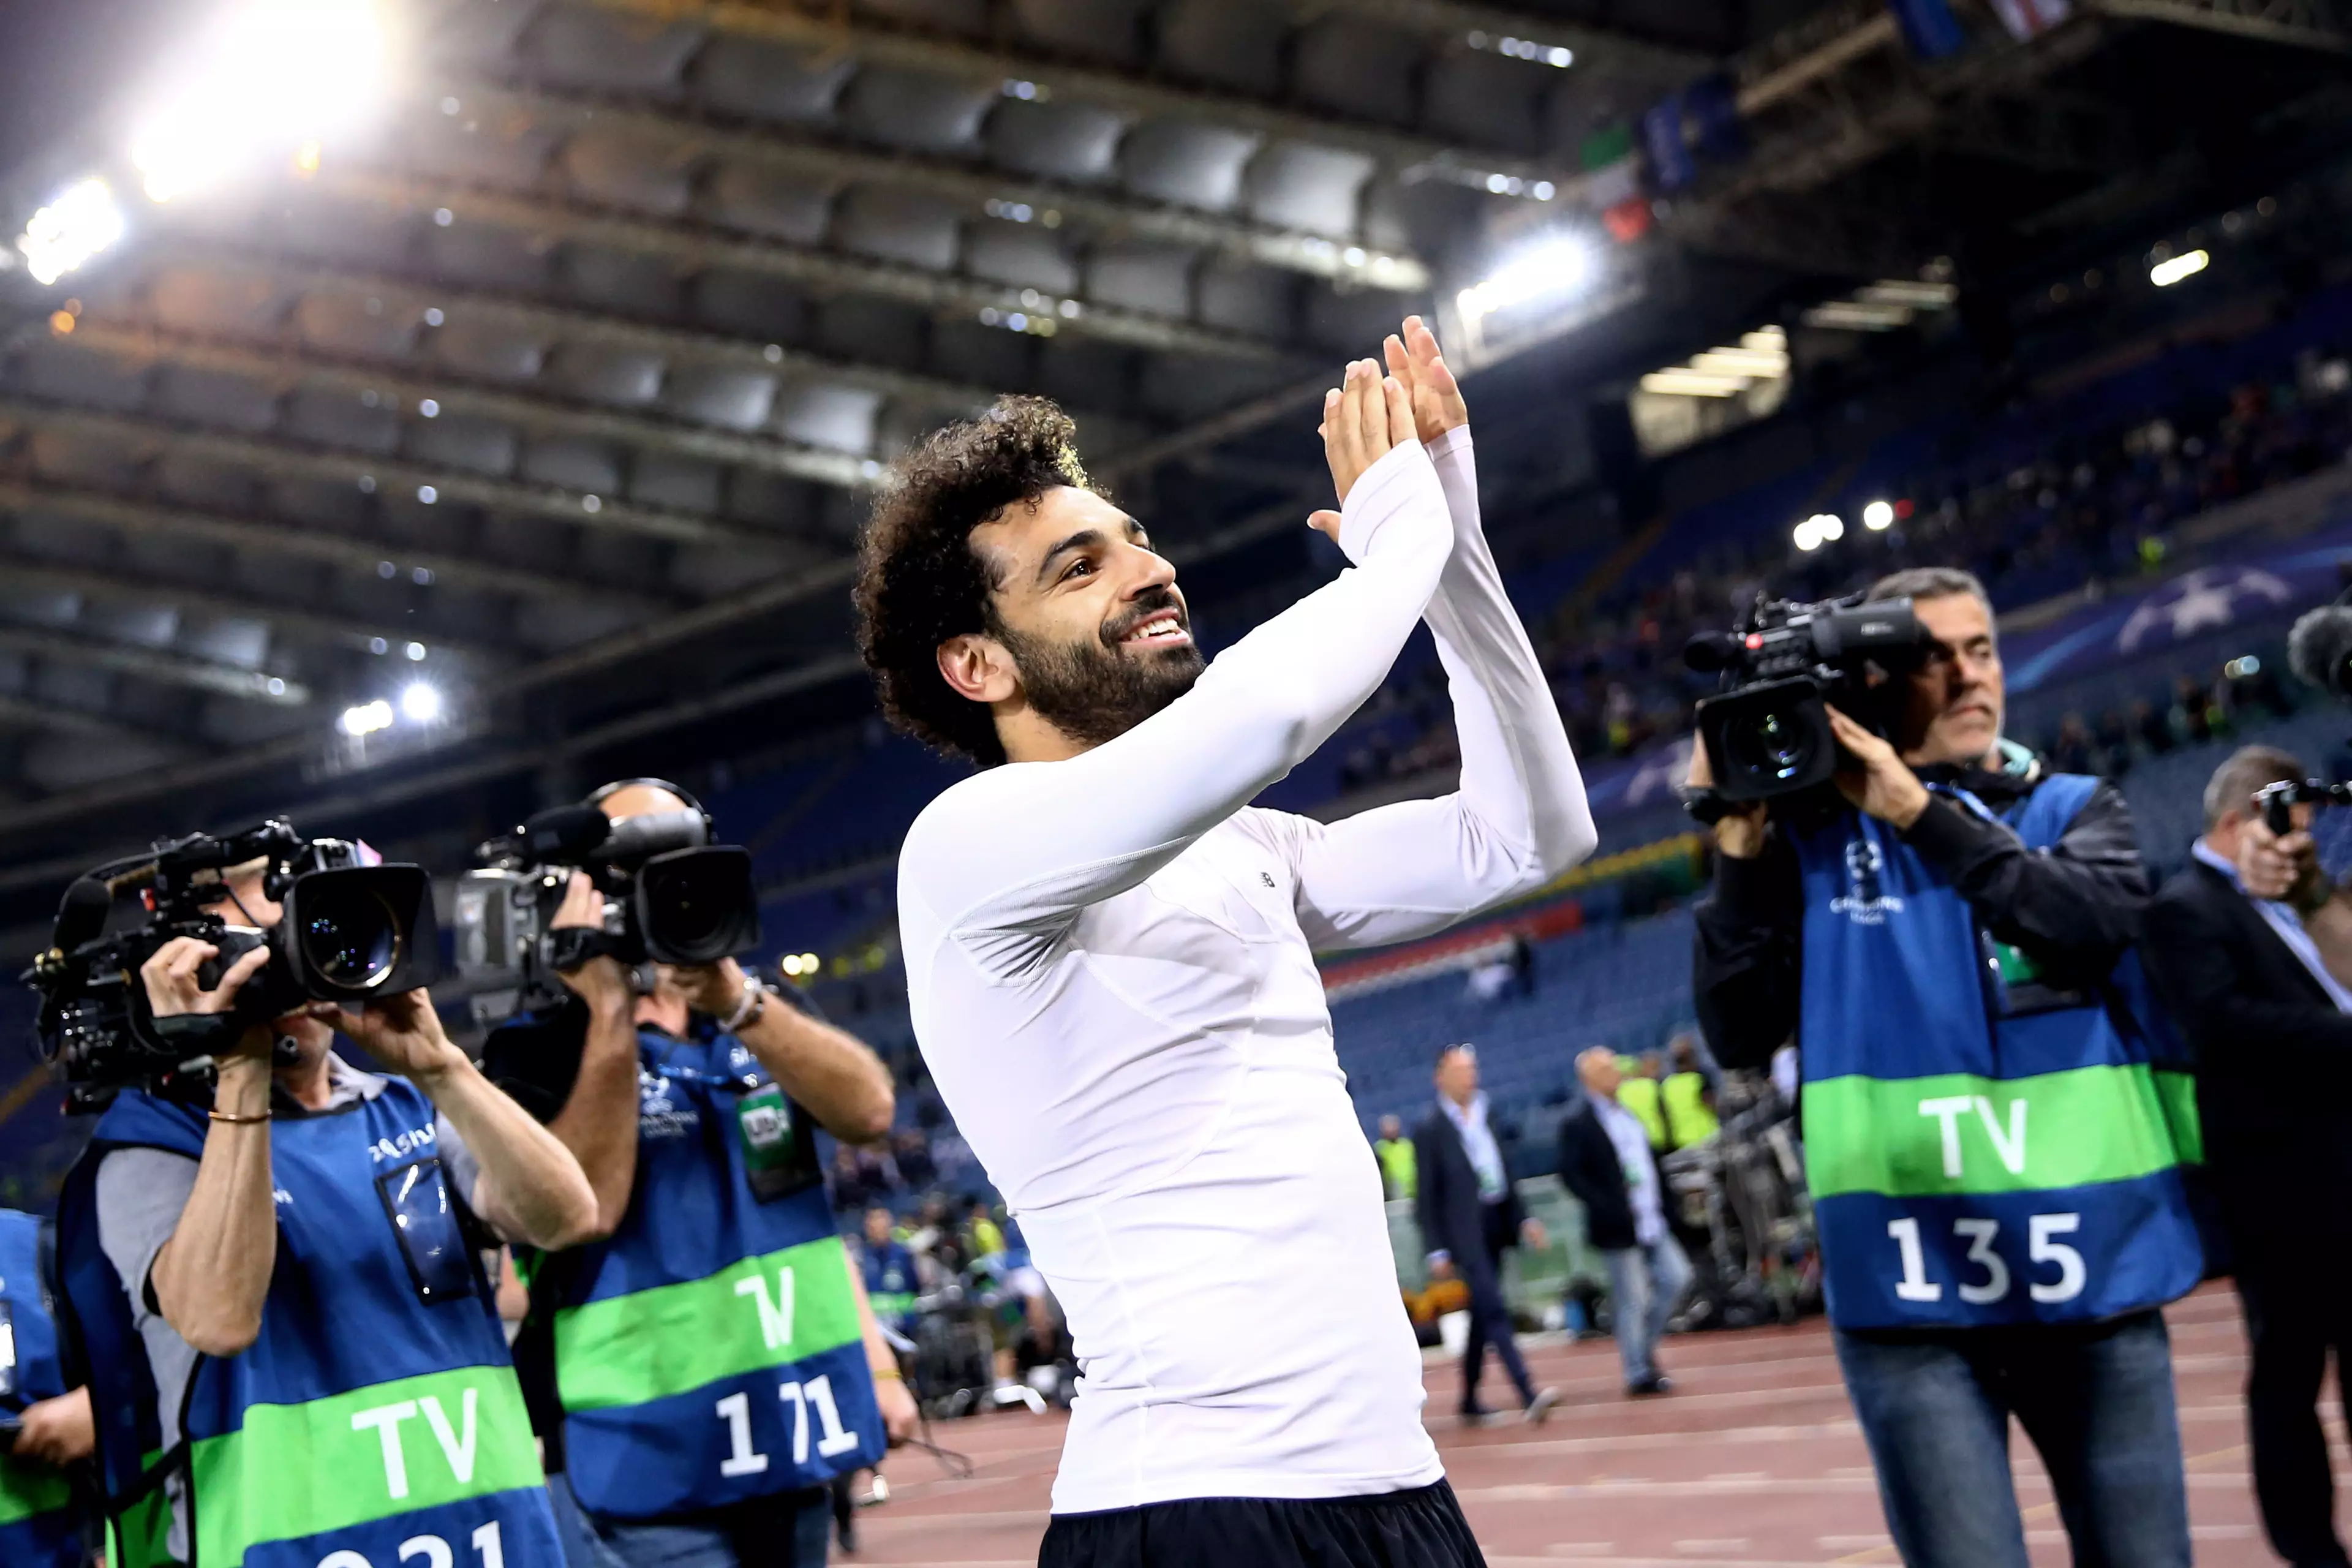 Salah greets the Liverpool fans. Image: PA